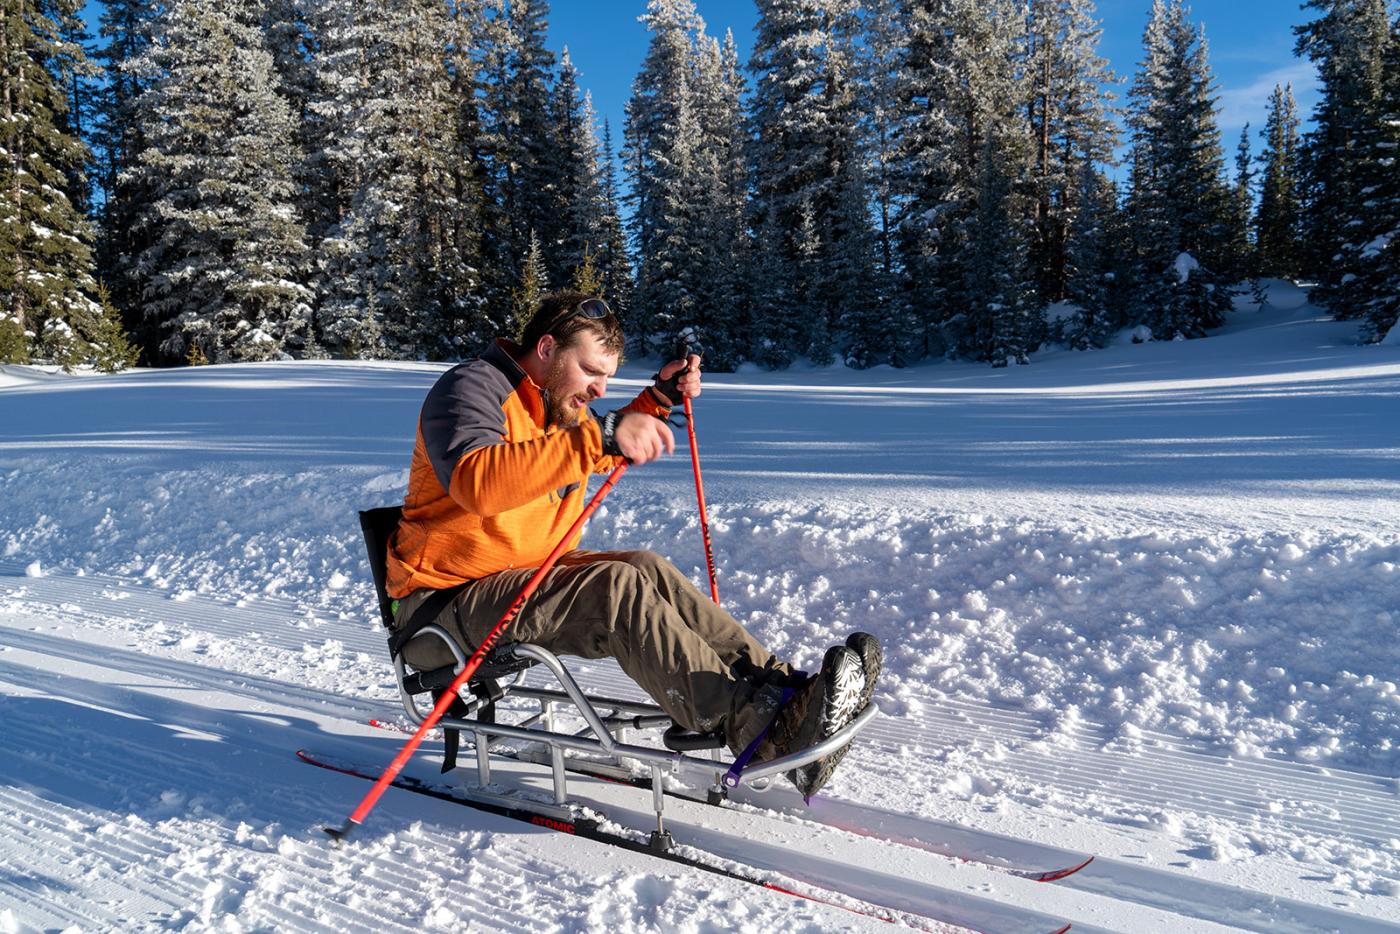 Collin Sallee, a recreations cross country sit skier in Colorado